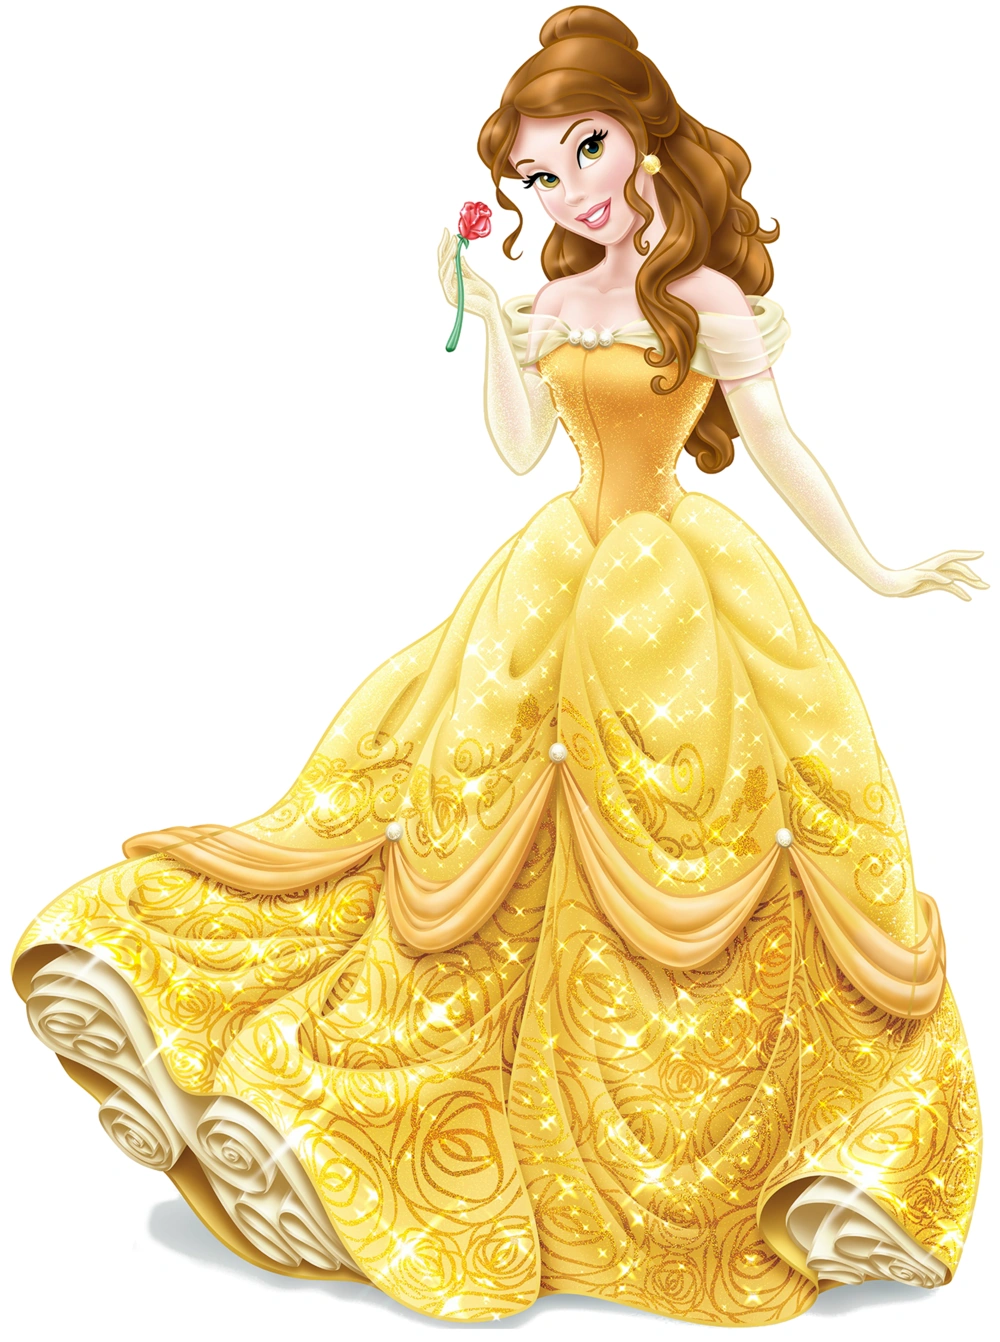 An Incredible Compilation of Princess Belle Images: The Ultimate ...